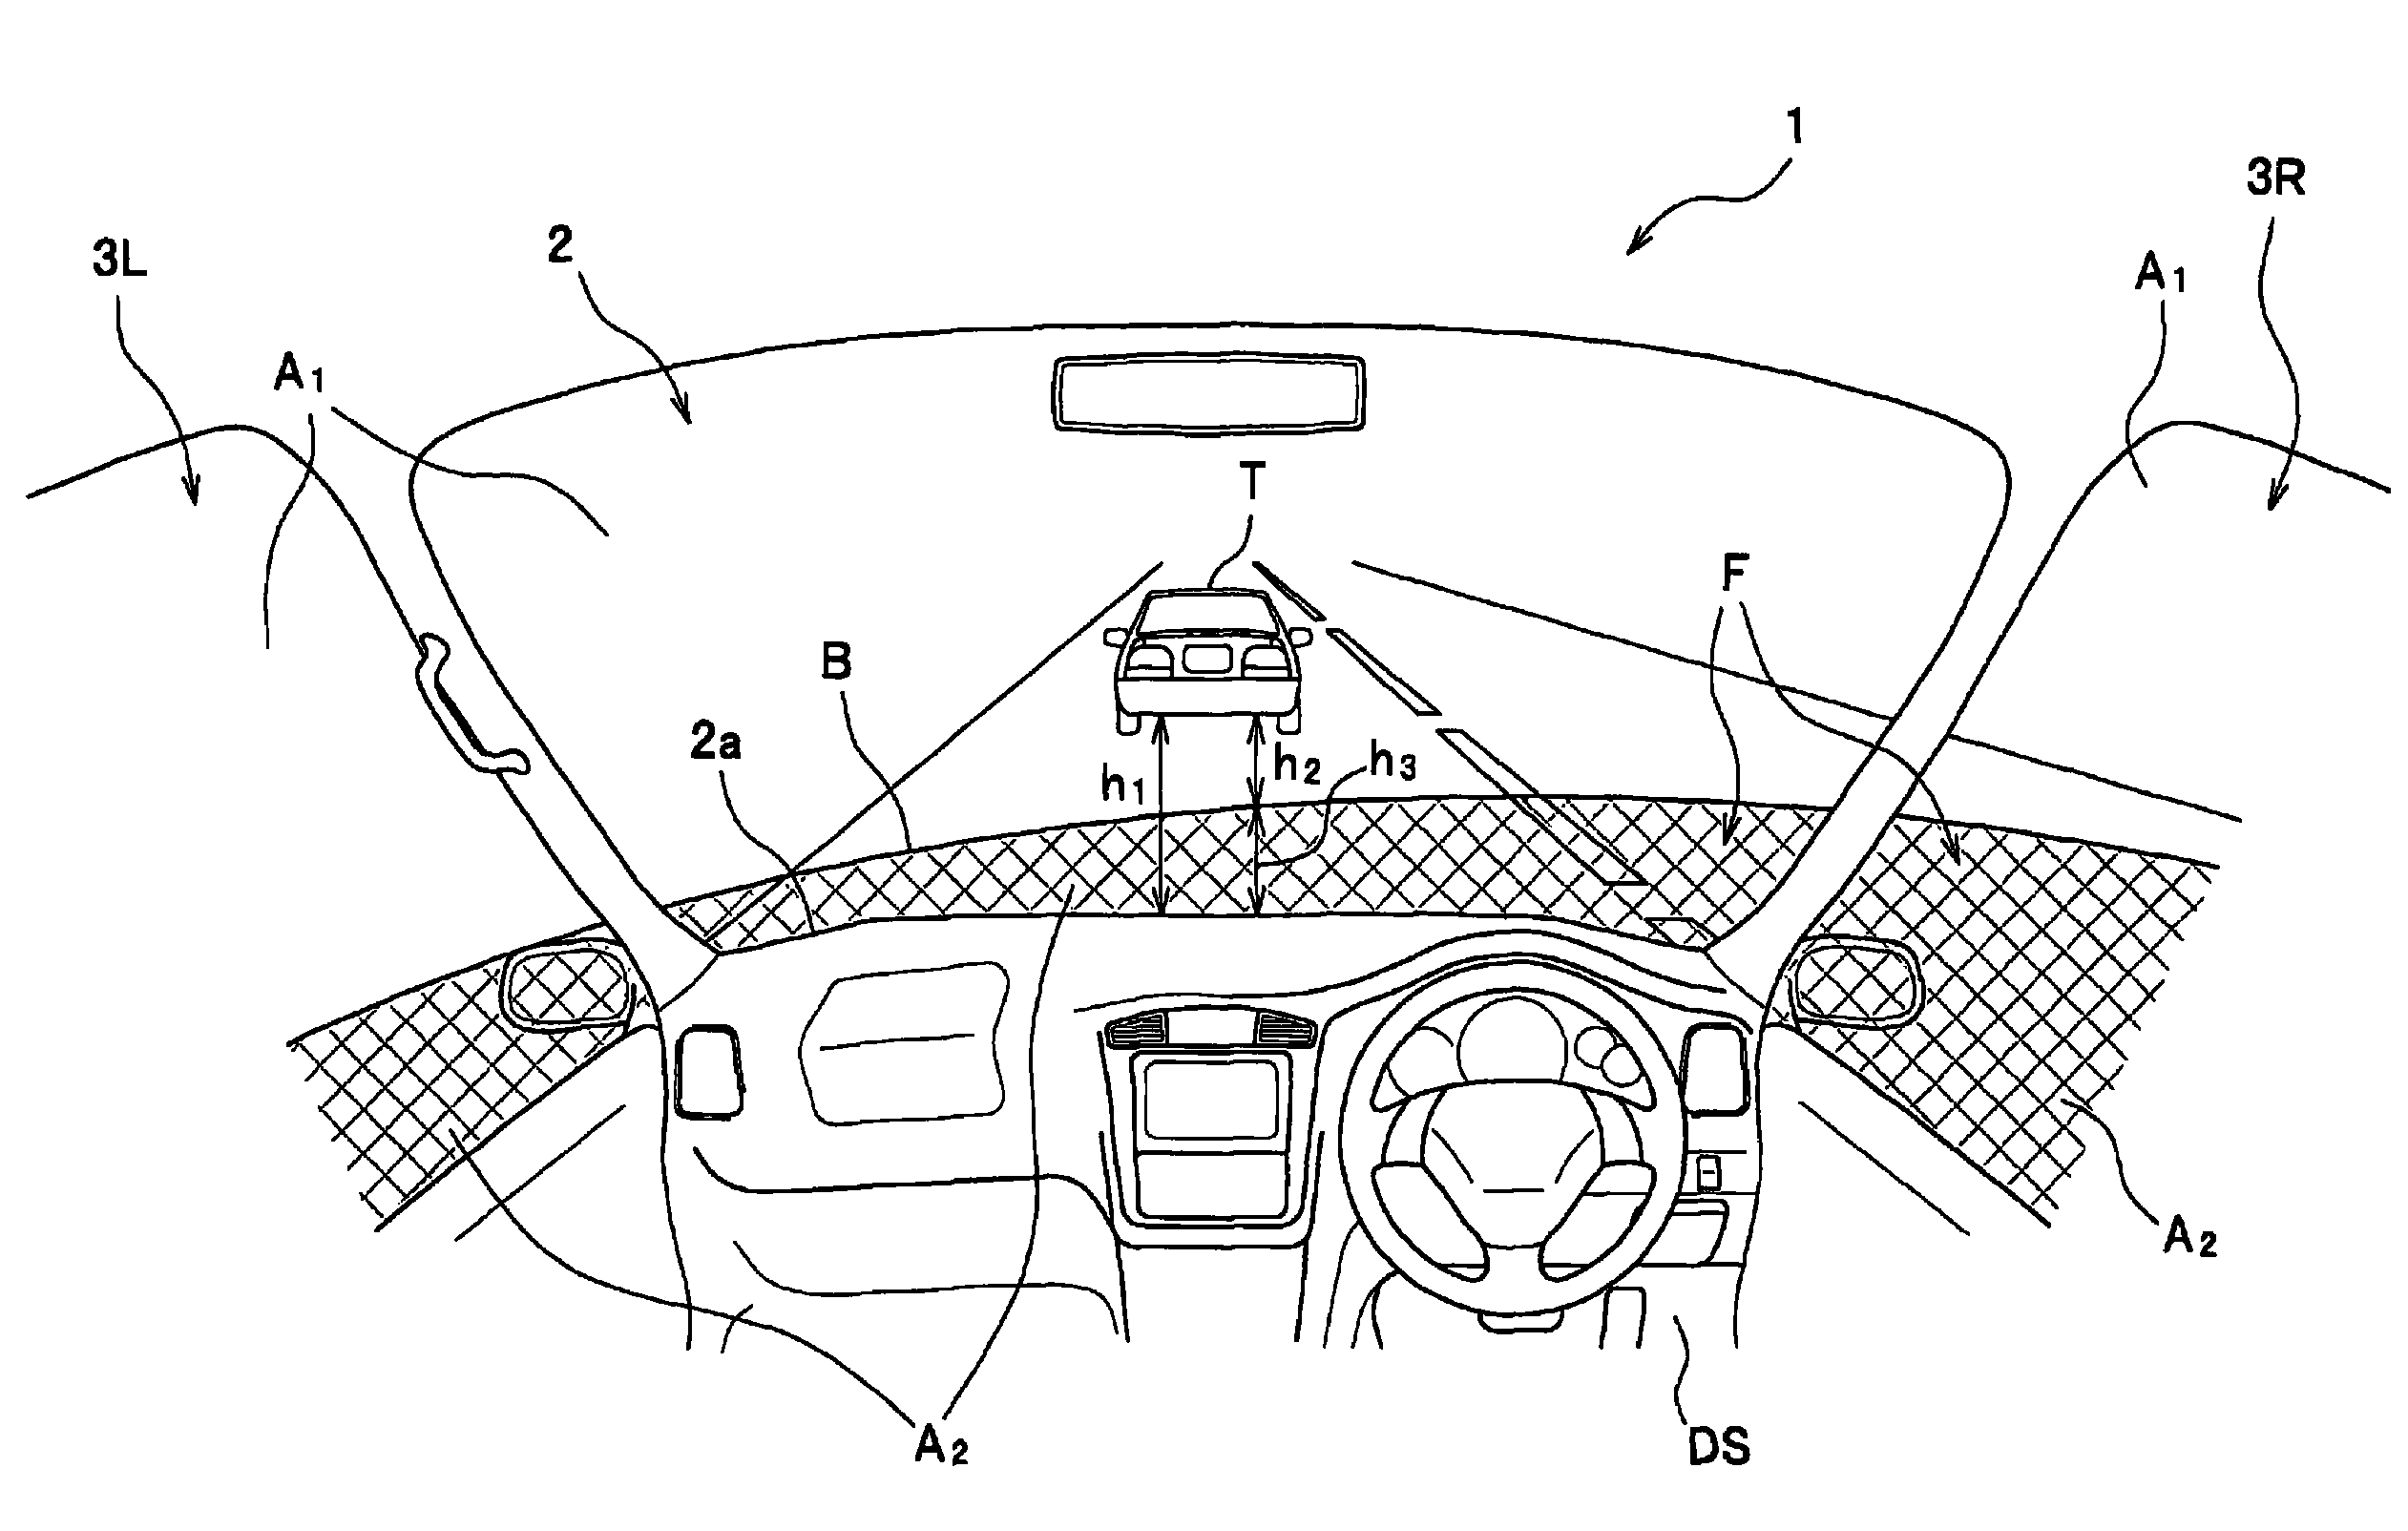 Vehicle for enhancing recognition accuracy of visual information